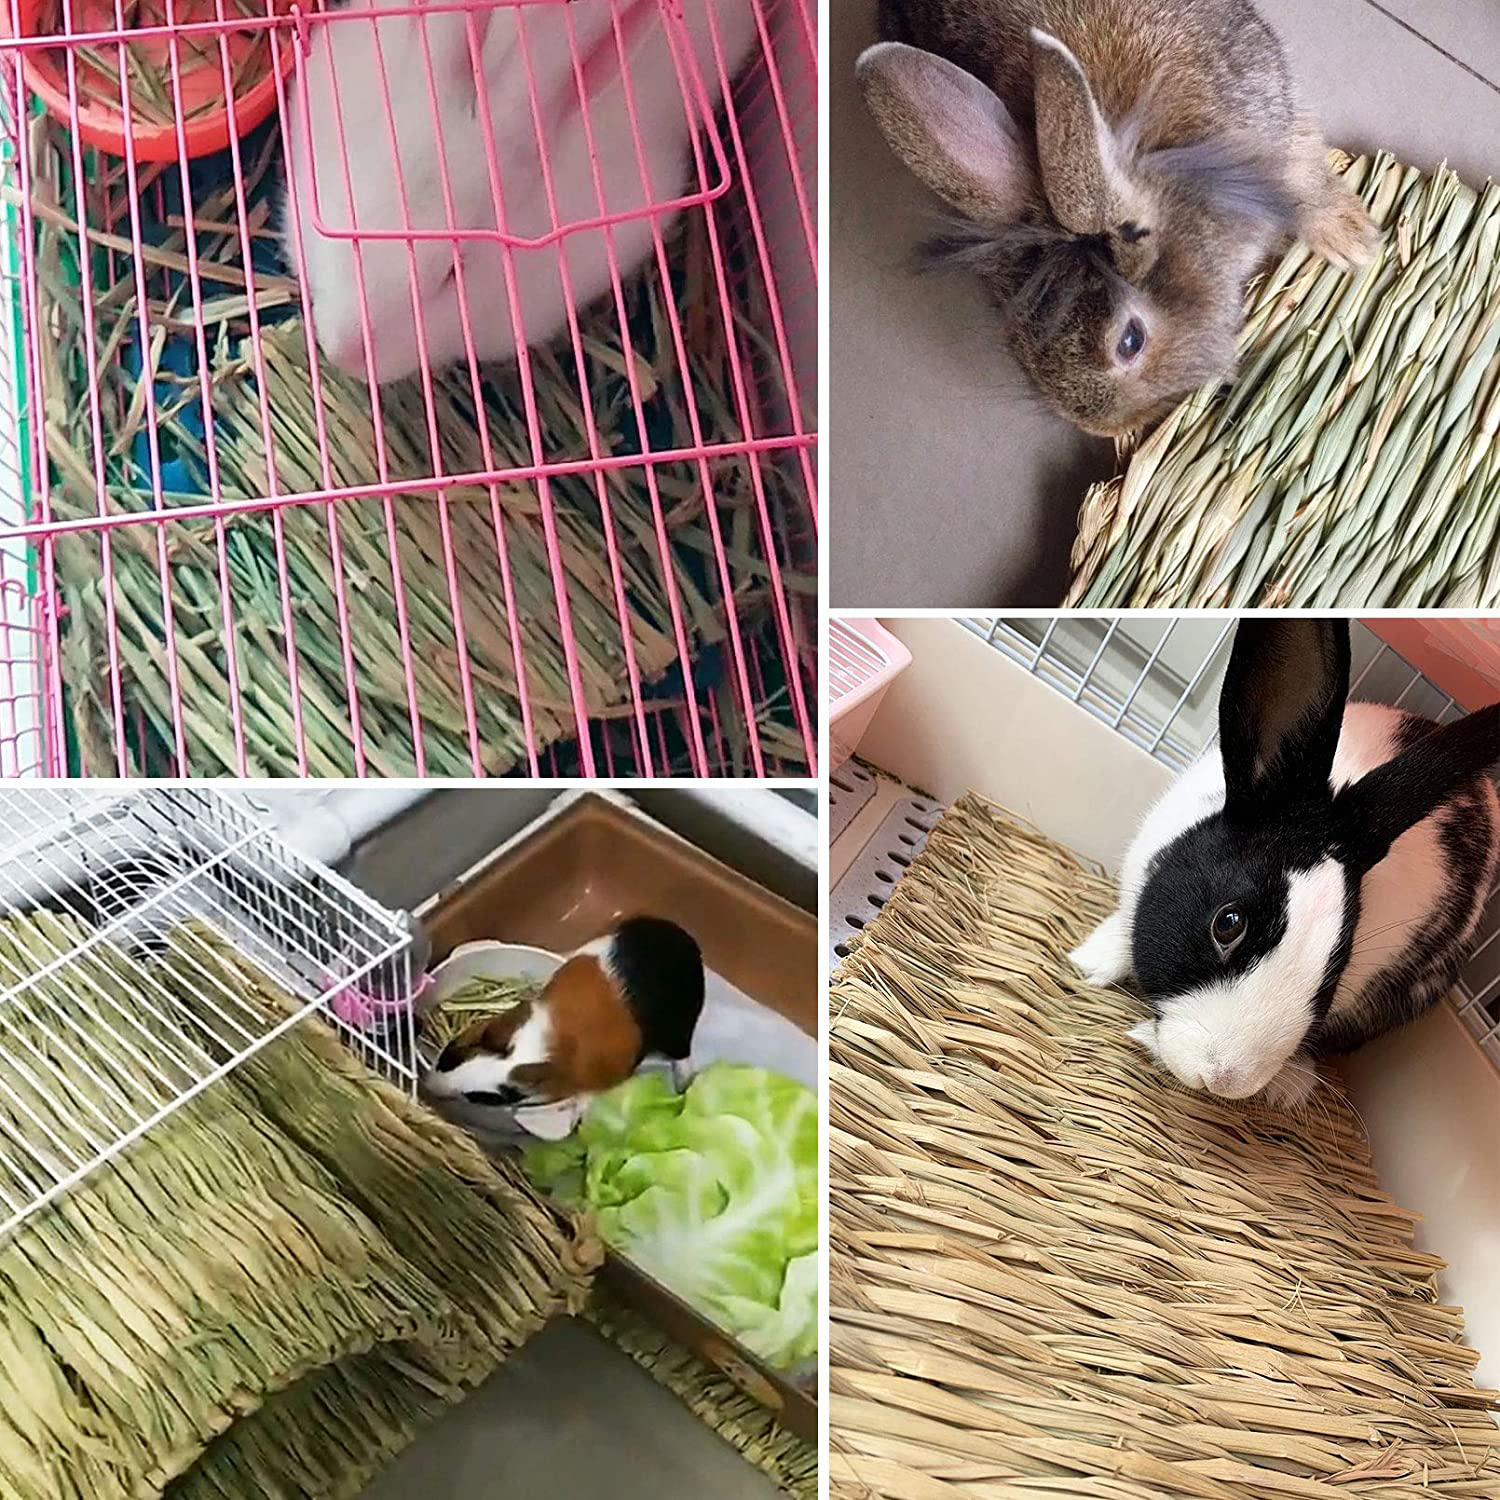 Kathson 6 PCS Rabbit Large Grass Mat Natural Grass Woven Mat Rabbits Chew Toys Grass Bedding Nest for Small Animal Bunny Rabbit Guinea Pigs Hamster Chinchillas Puppy Biddy Sleeping Chewing